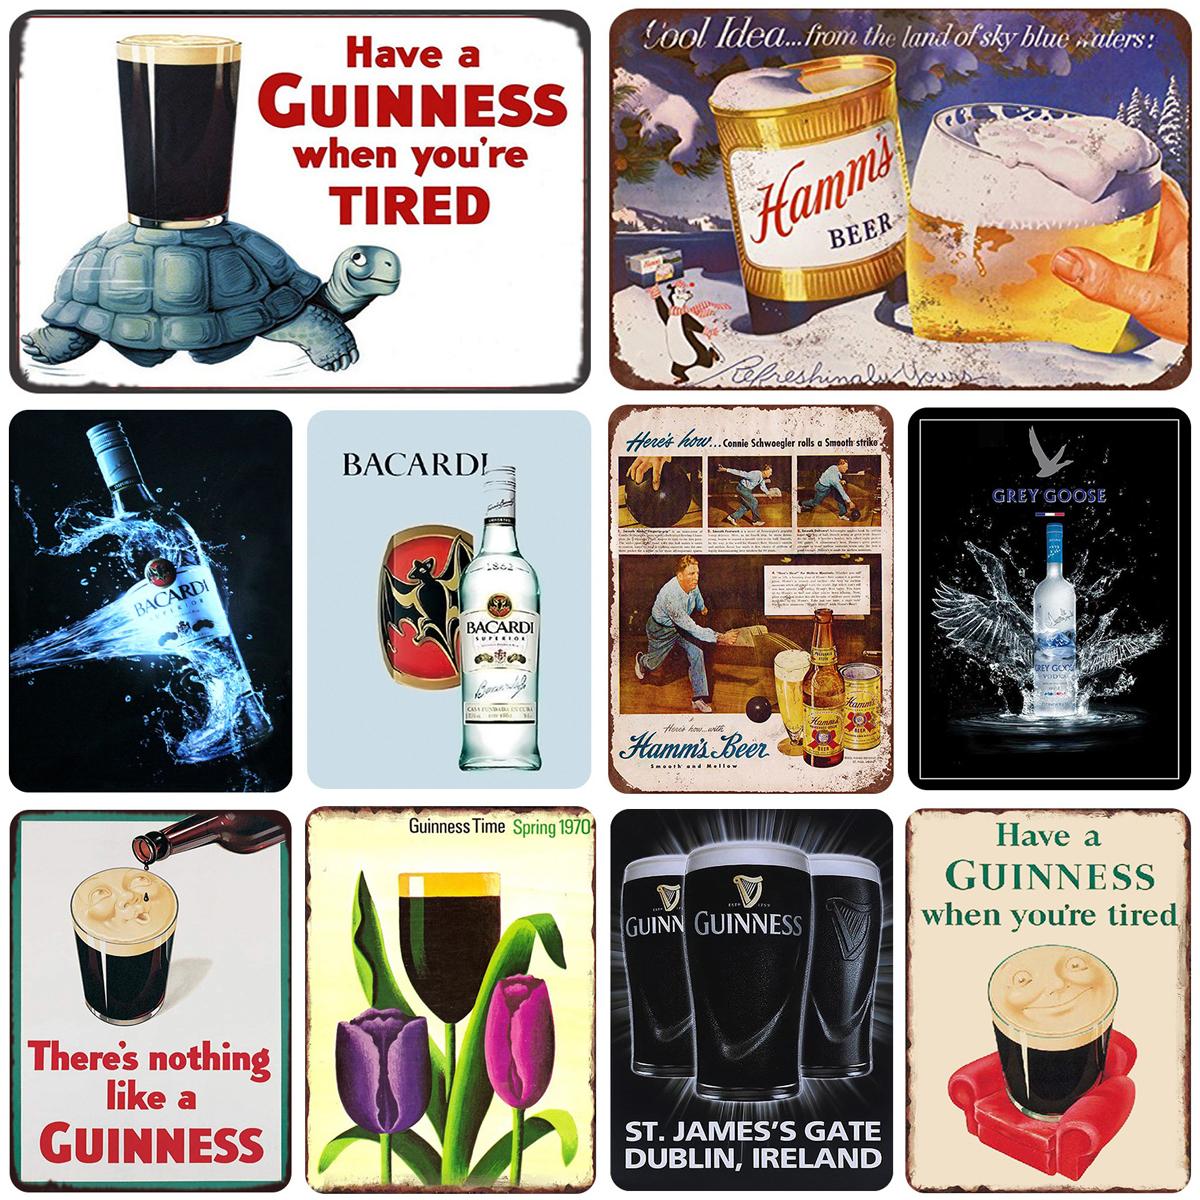 

2022 Guinness Vintage Metal Painting Tin Sign Pub Bar Casino Home Decor Beer Advertising Plate Painting Poster Wall Art Sticker Size 20X30cm